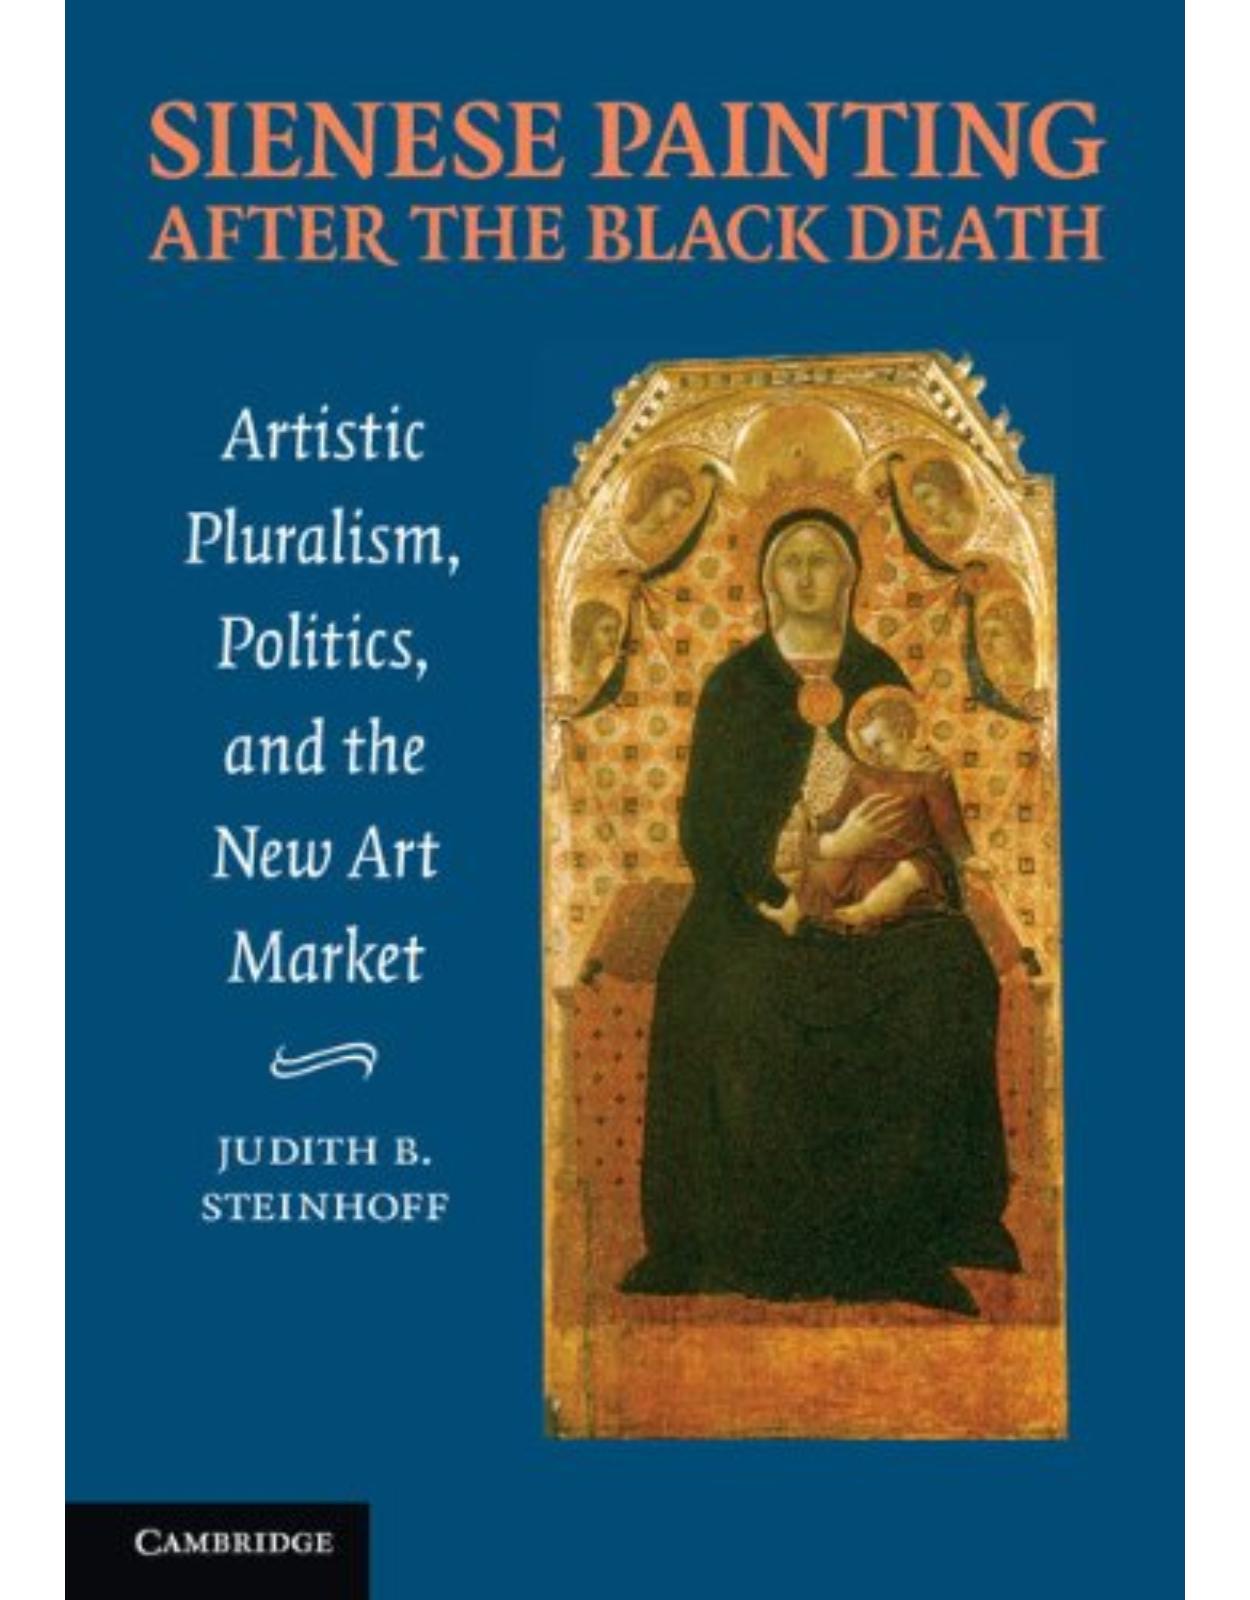 Sienese Painting after the Black Death: Artistic Pluralism, Politics, and the New Art Market